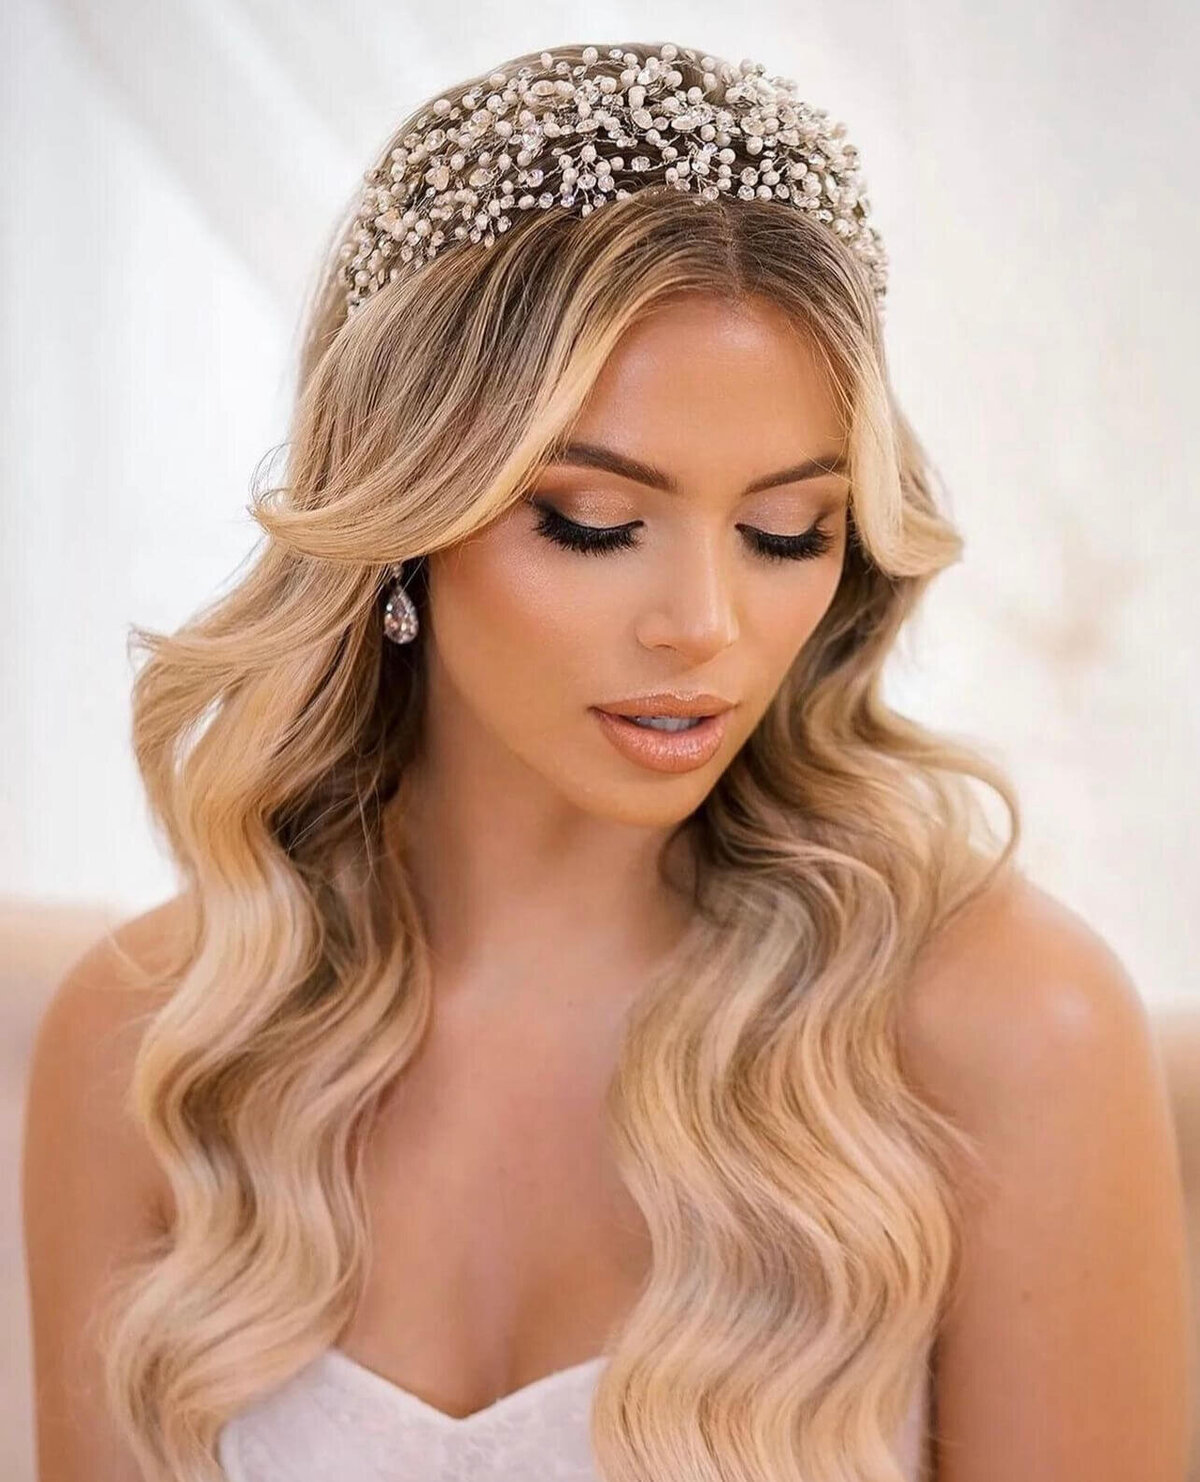 vanessa-andrea-beauty-and-co-luxury-bridal-hair-makeup-home-01